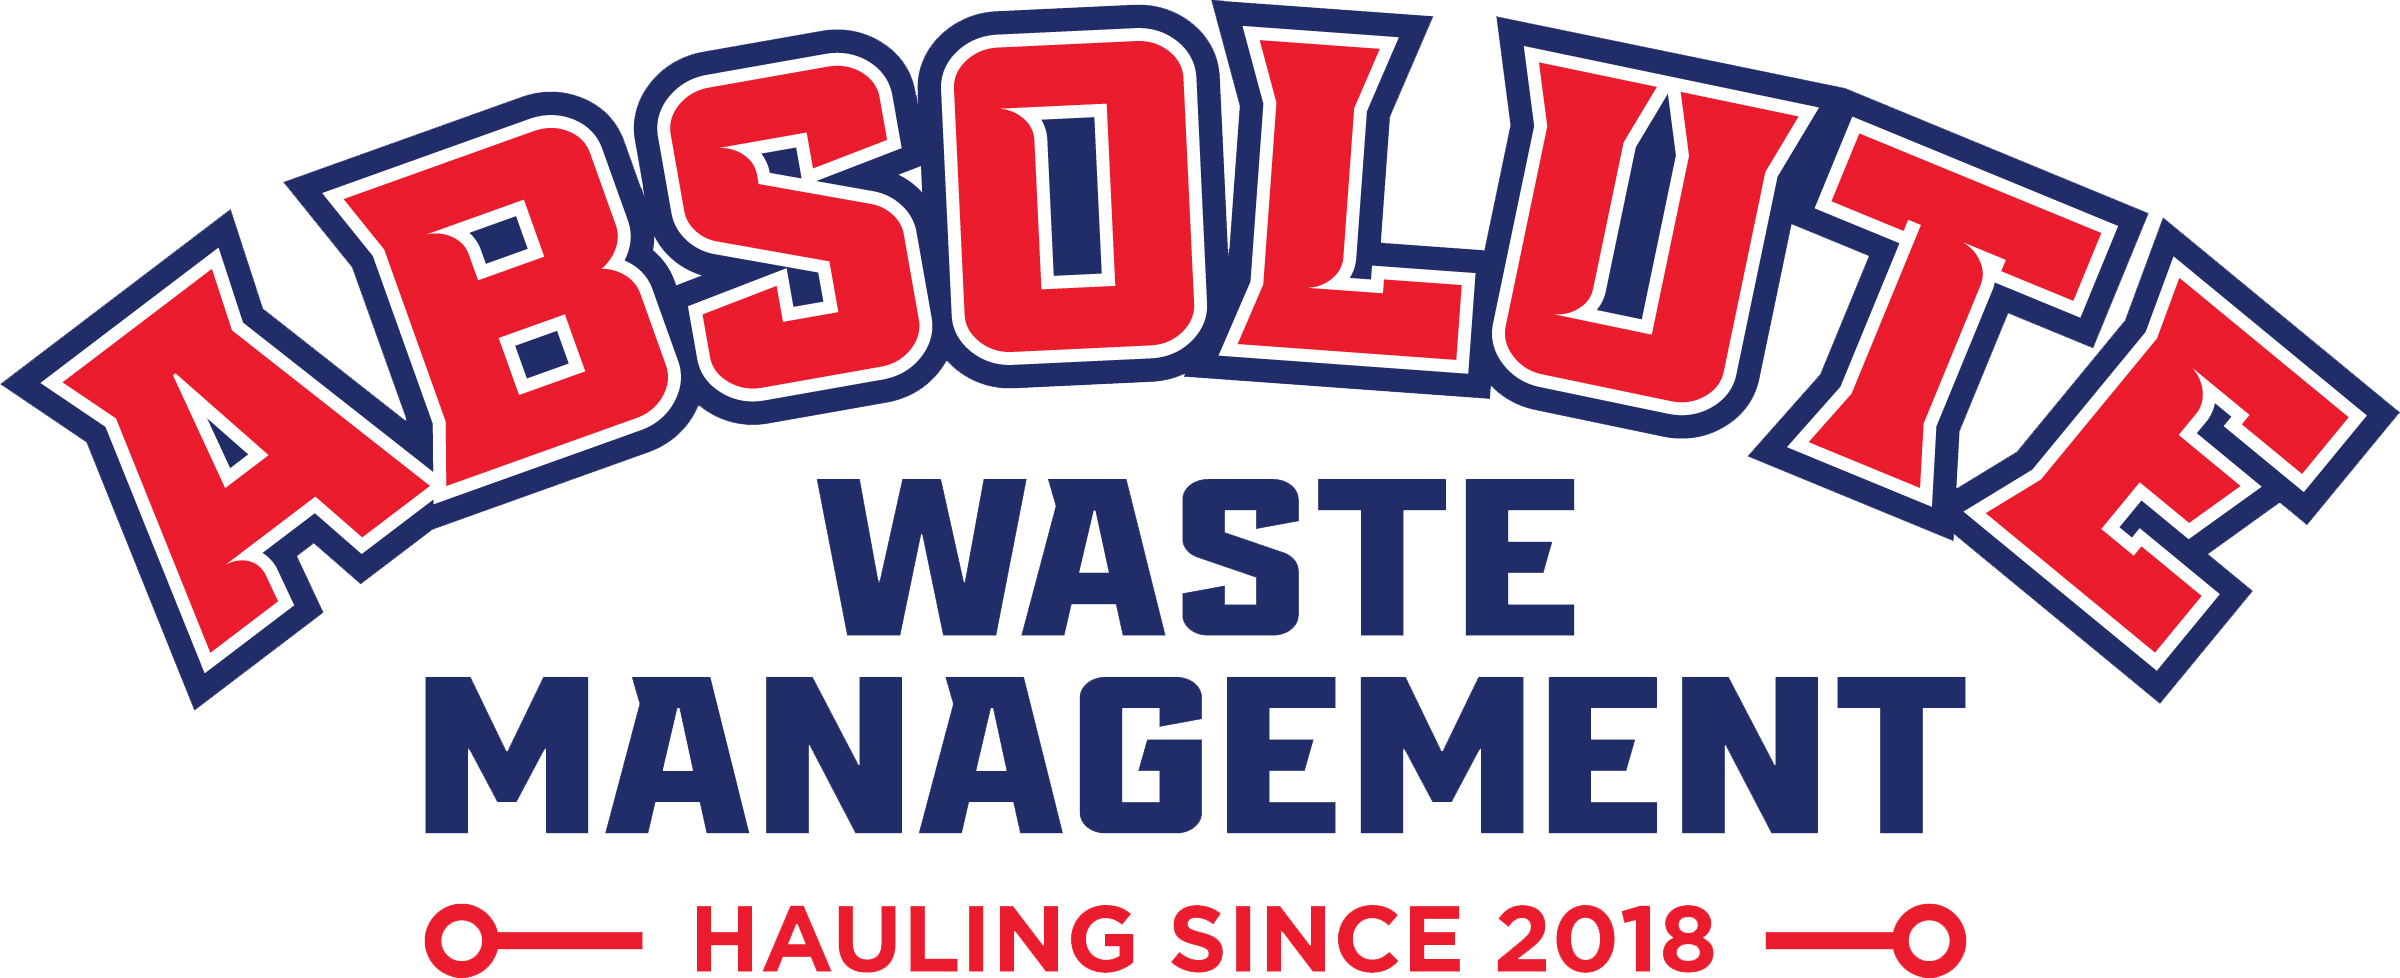 ABSOLUTE WASTE MANAGMENT logo